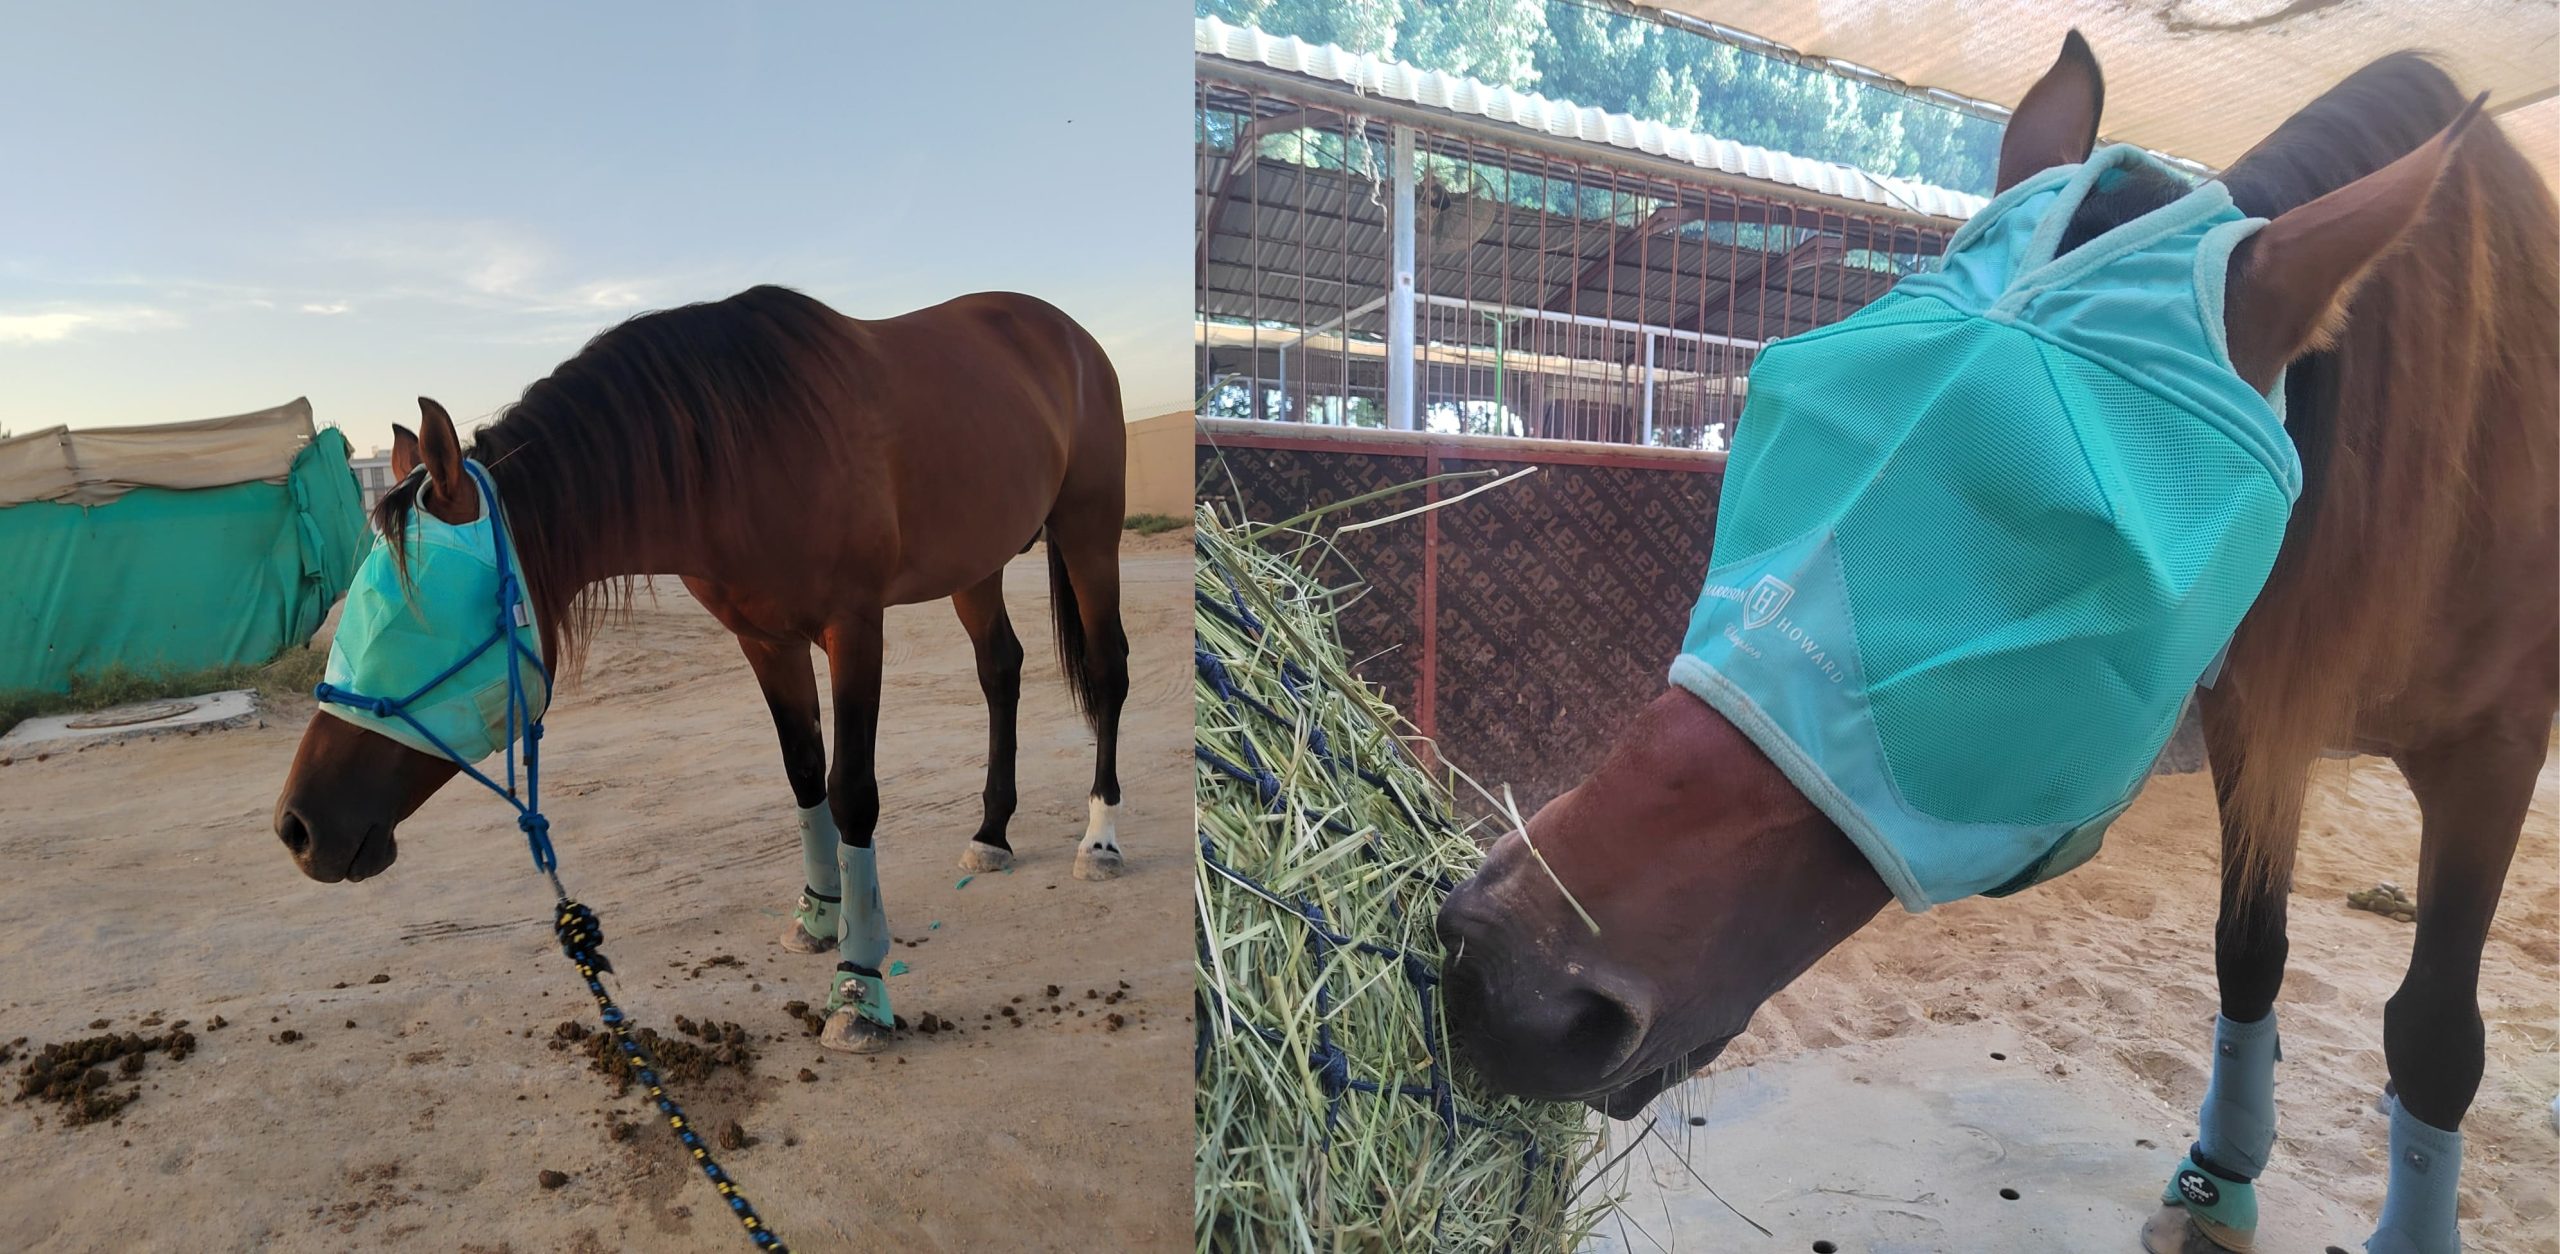 Yazan with teal fly mask